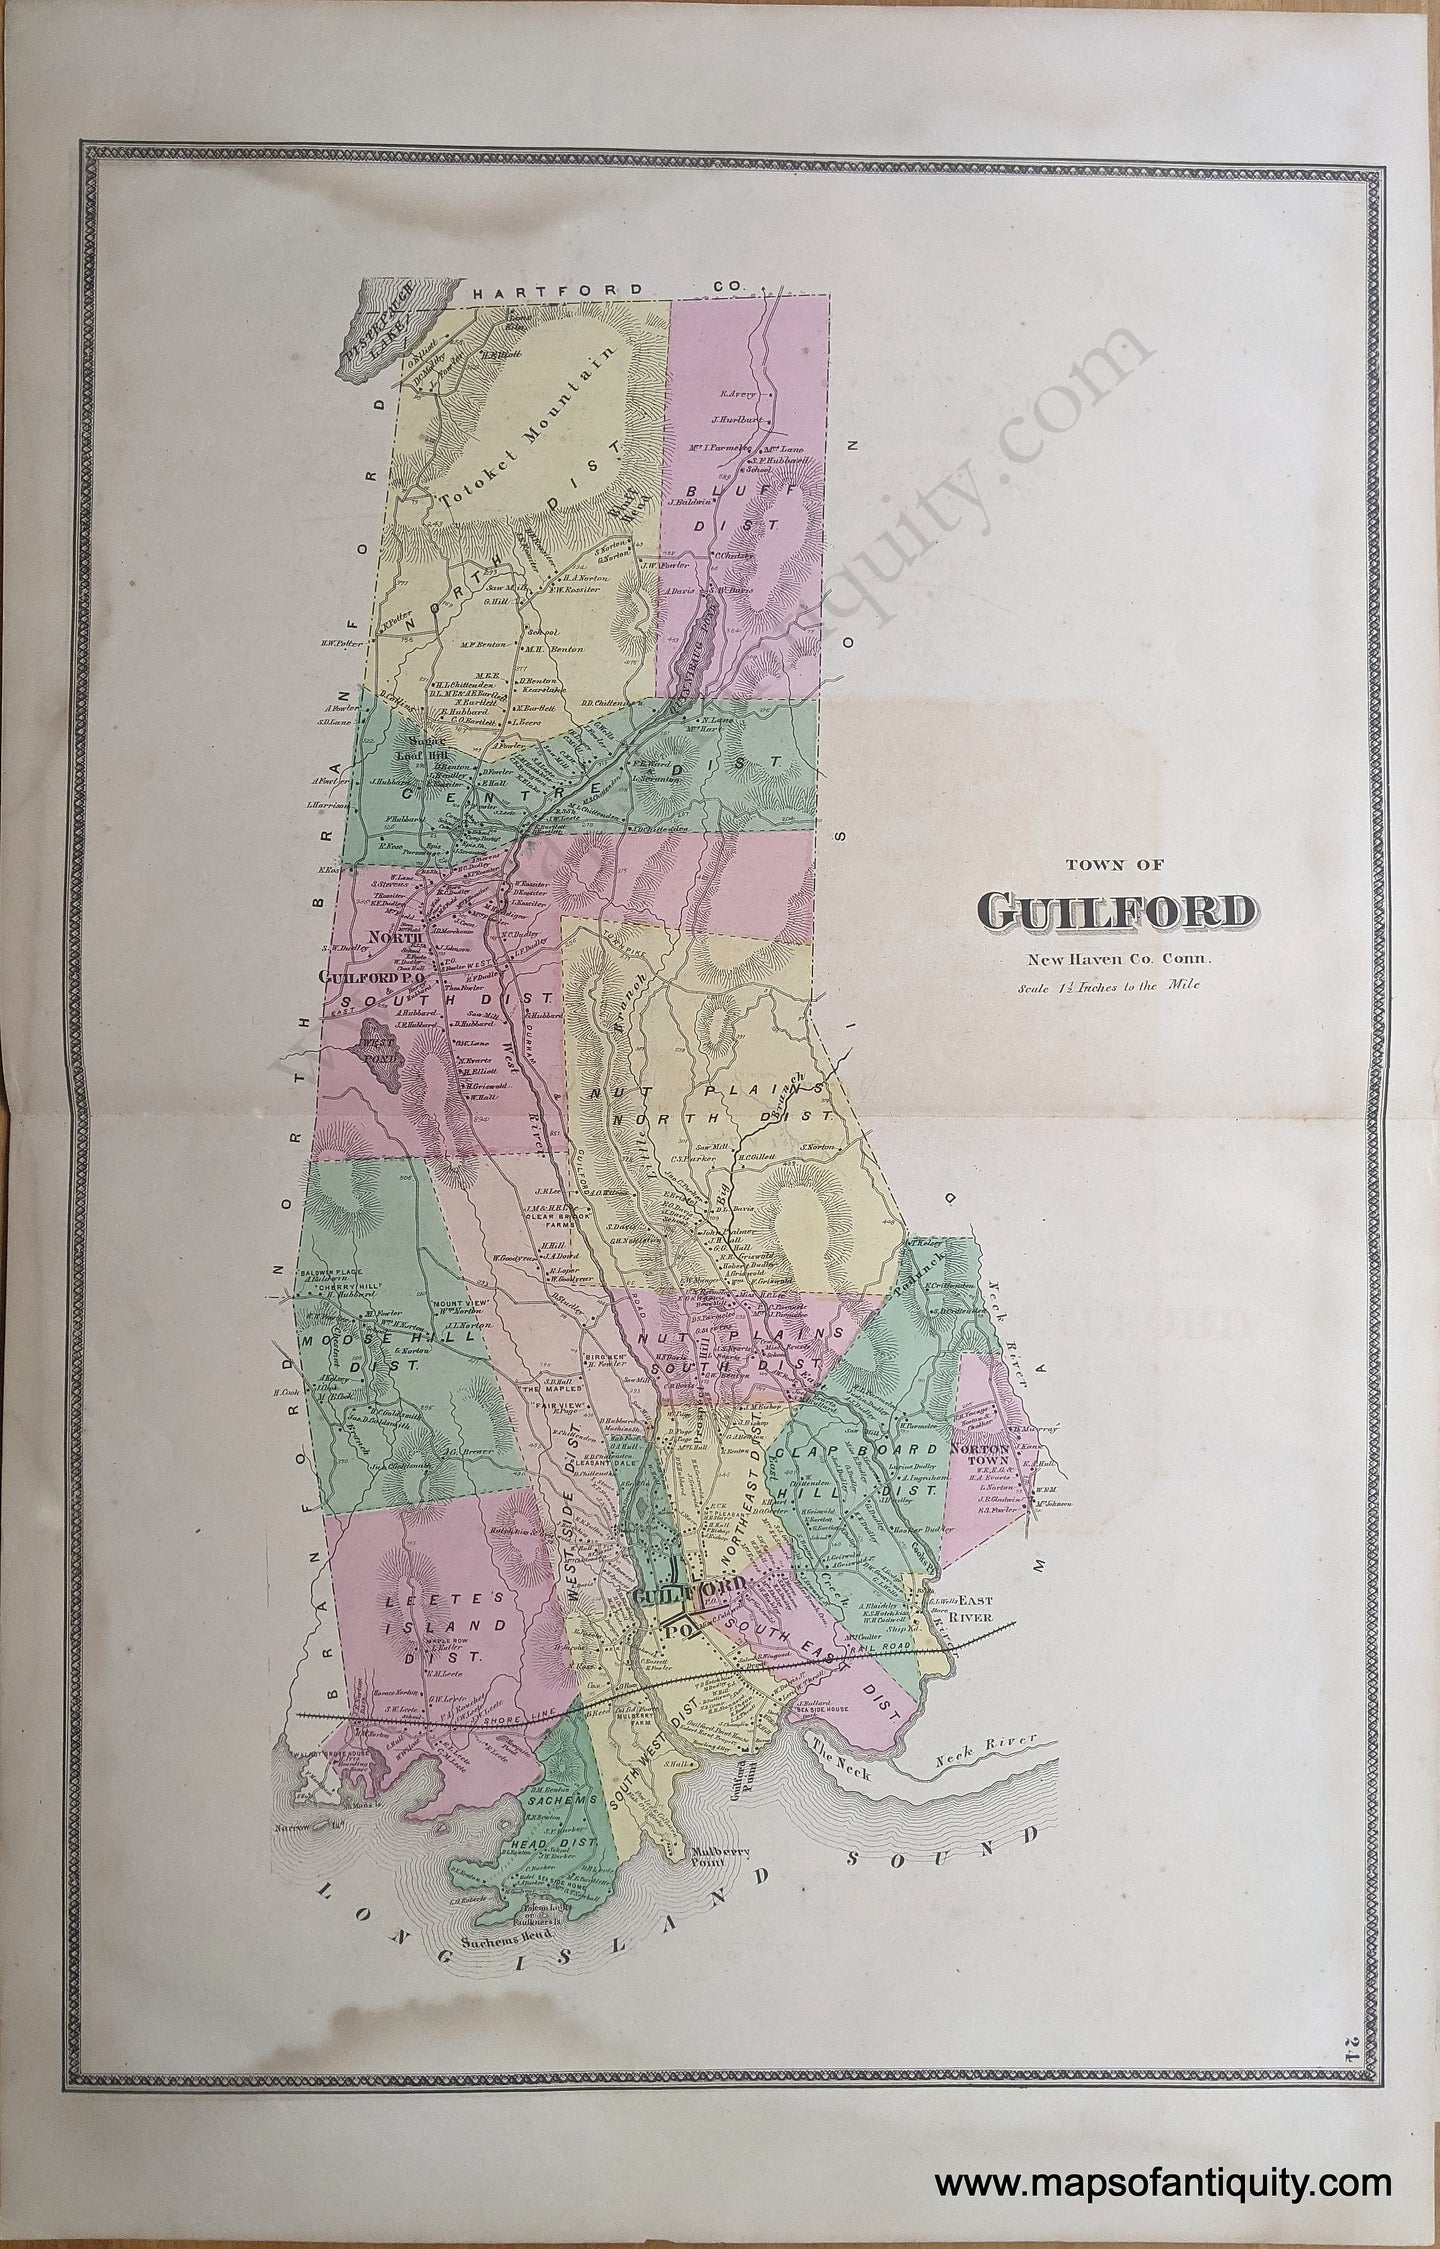 Antique-Hand-Colored-Map-Town-of-Guilford-New-Haven-Co.-Conn.-**********-United-States-Connecticut-1868-Beers-Maps-Of-Antiquity